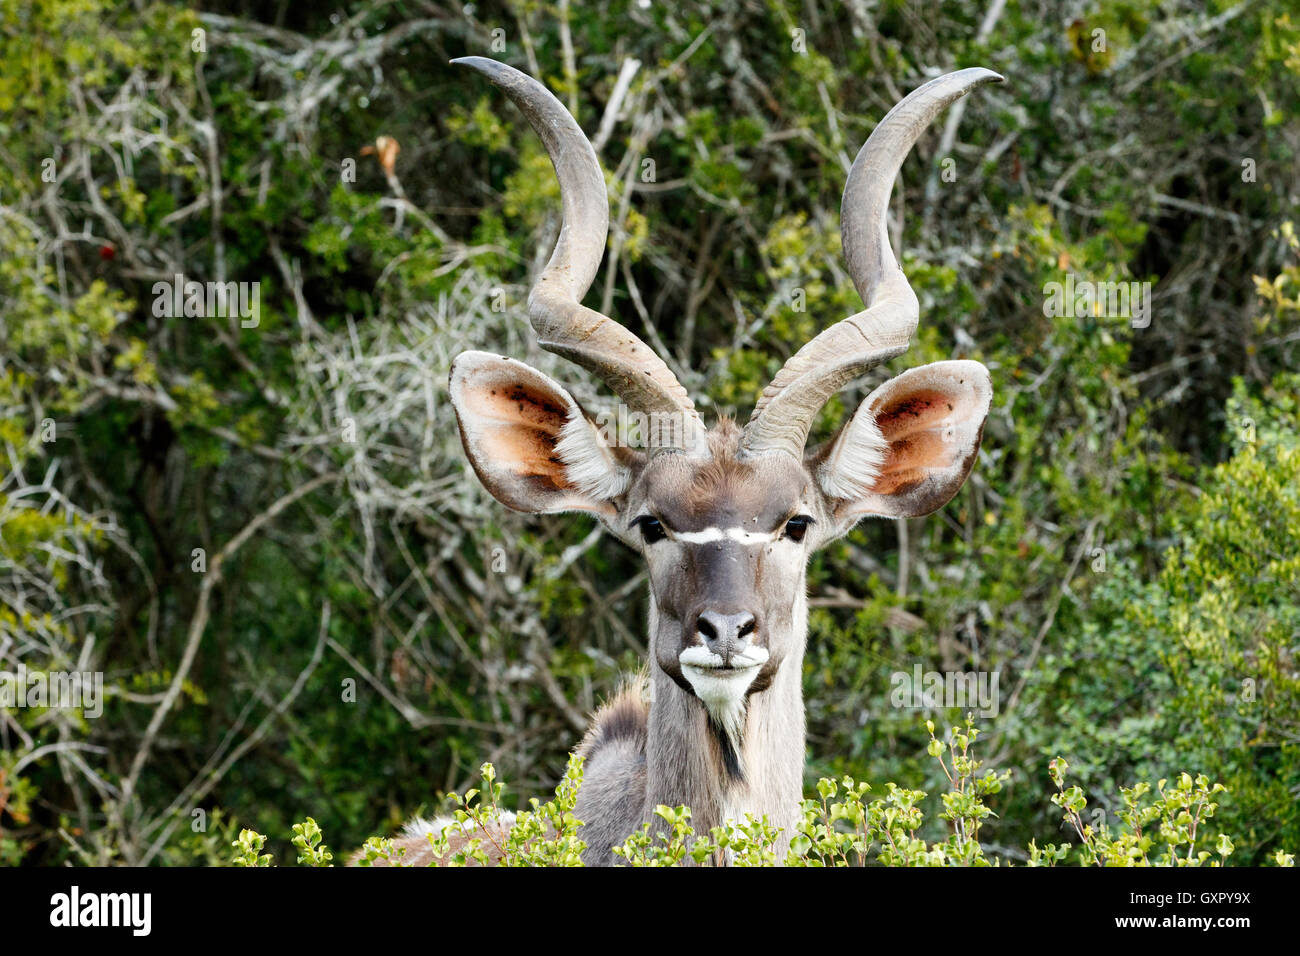 ID Photo look - The Greater Kudu is a woodland antelope found throughout eastern and southern Africa. Despite occupying such wid Stock Photo